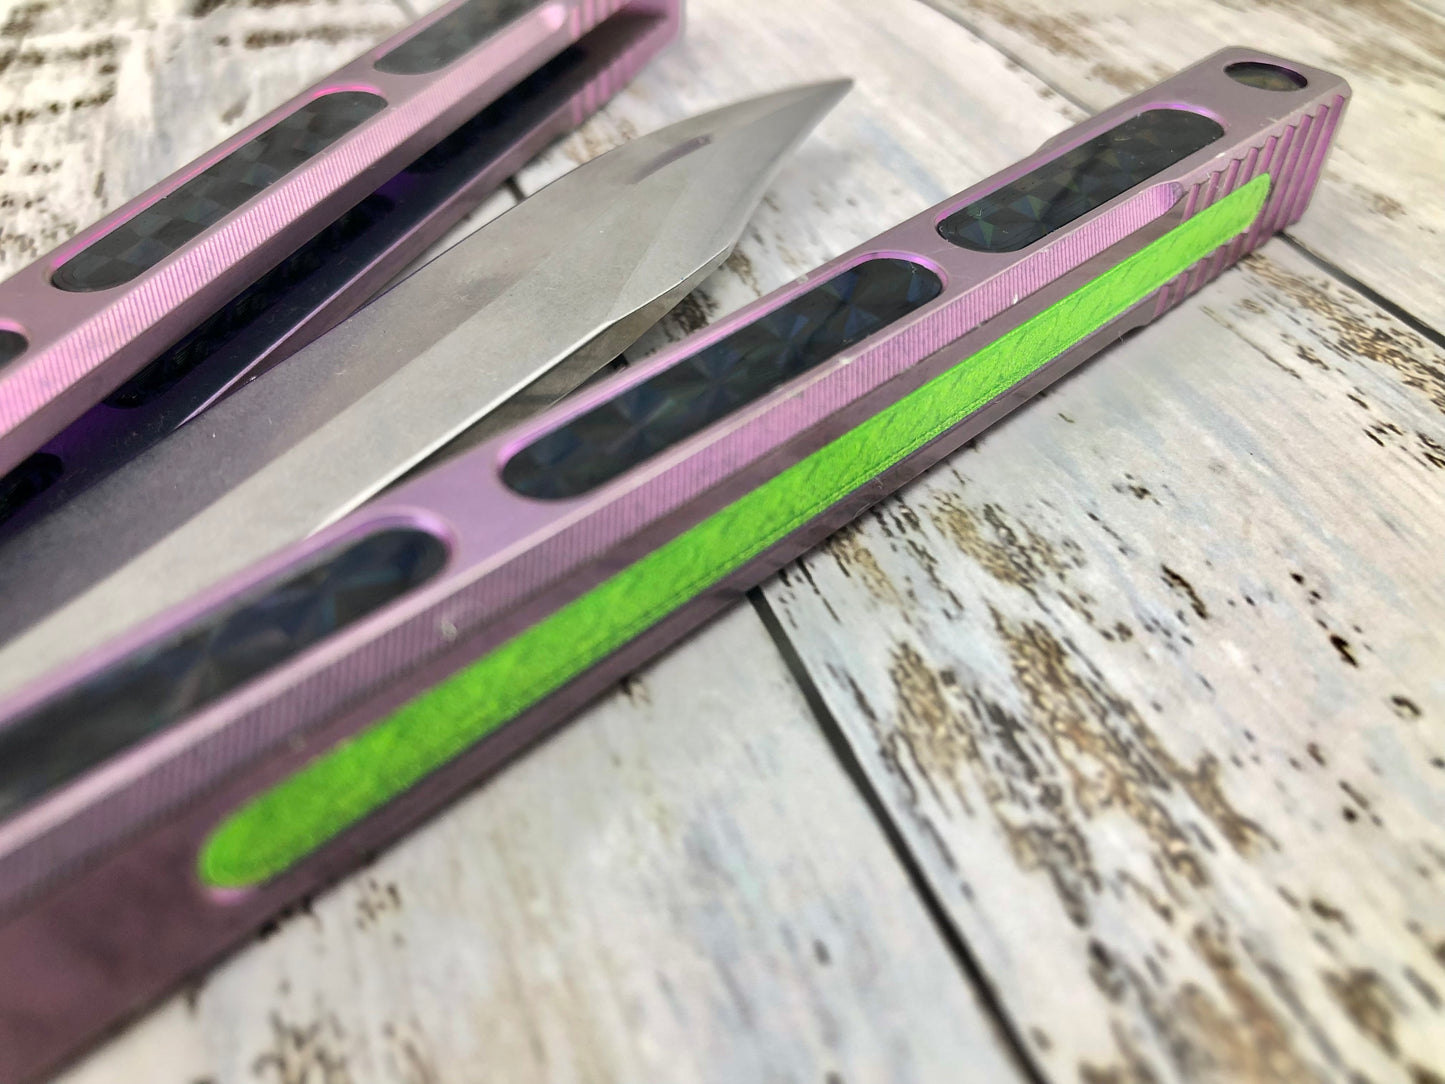 Add a pop of color and silence the ring of your MachineWise Prysma v1, Prysma Pro, and SlifT v2 balisongs with these polyurethane Zippy Speed Channel inlays.